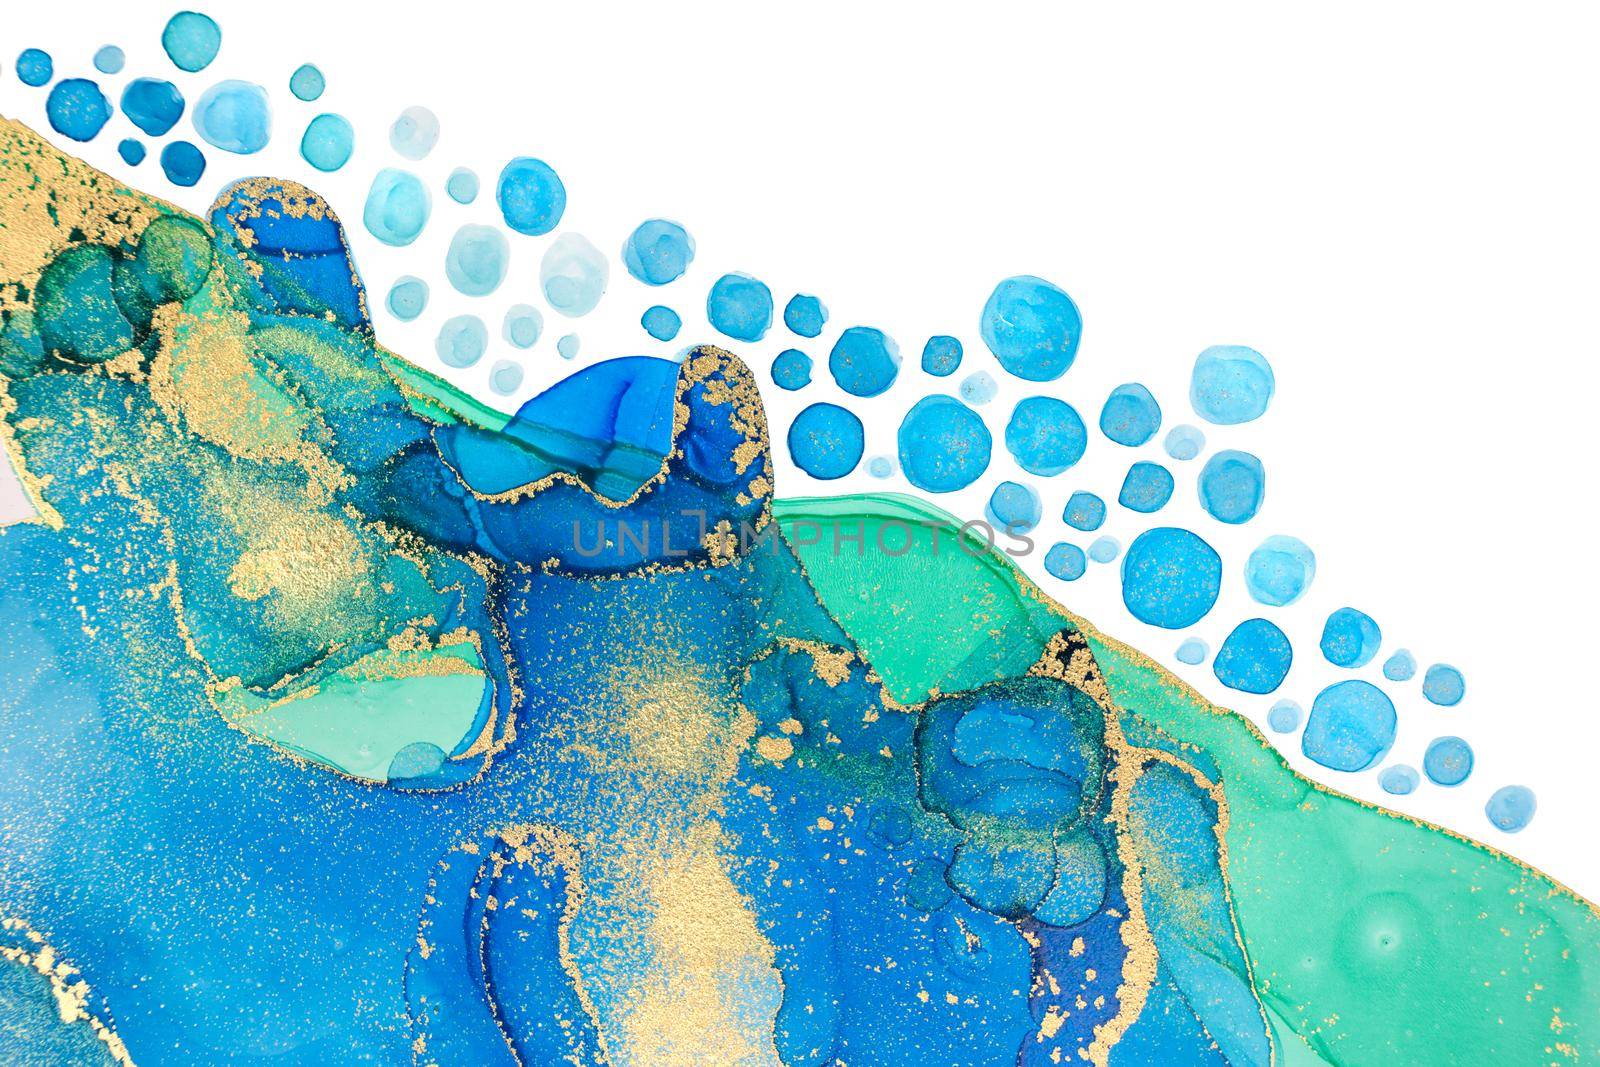 Abstract ocean foam print. Watercolor green and blue texture with gold glitter